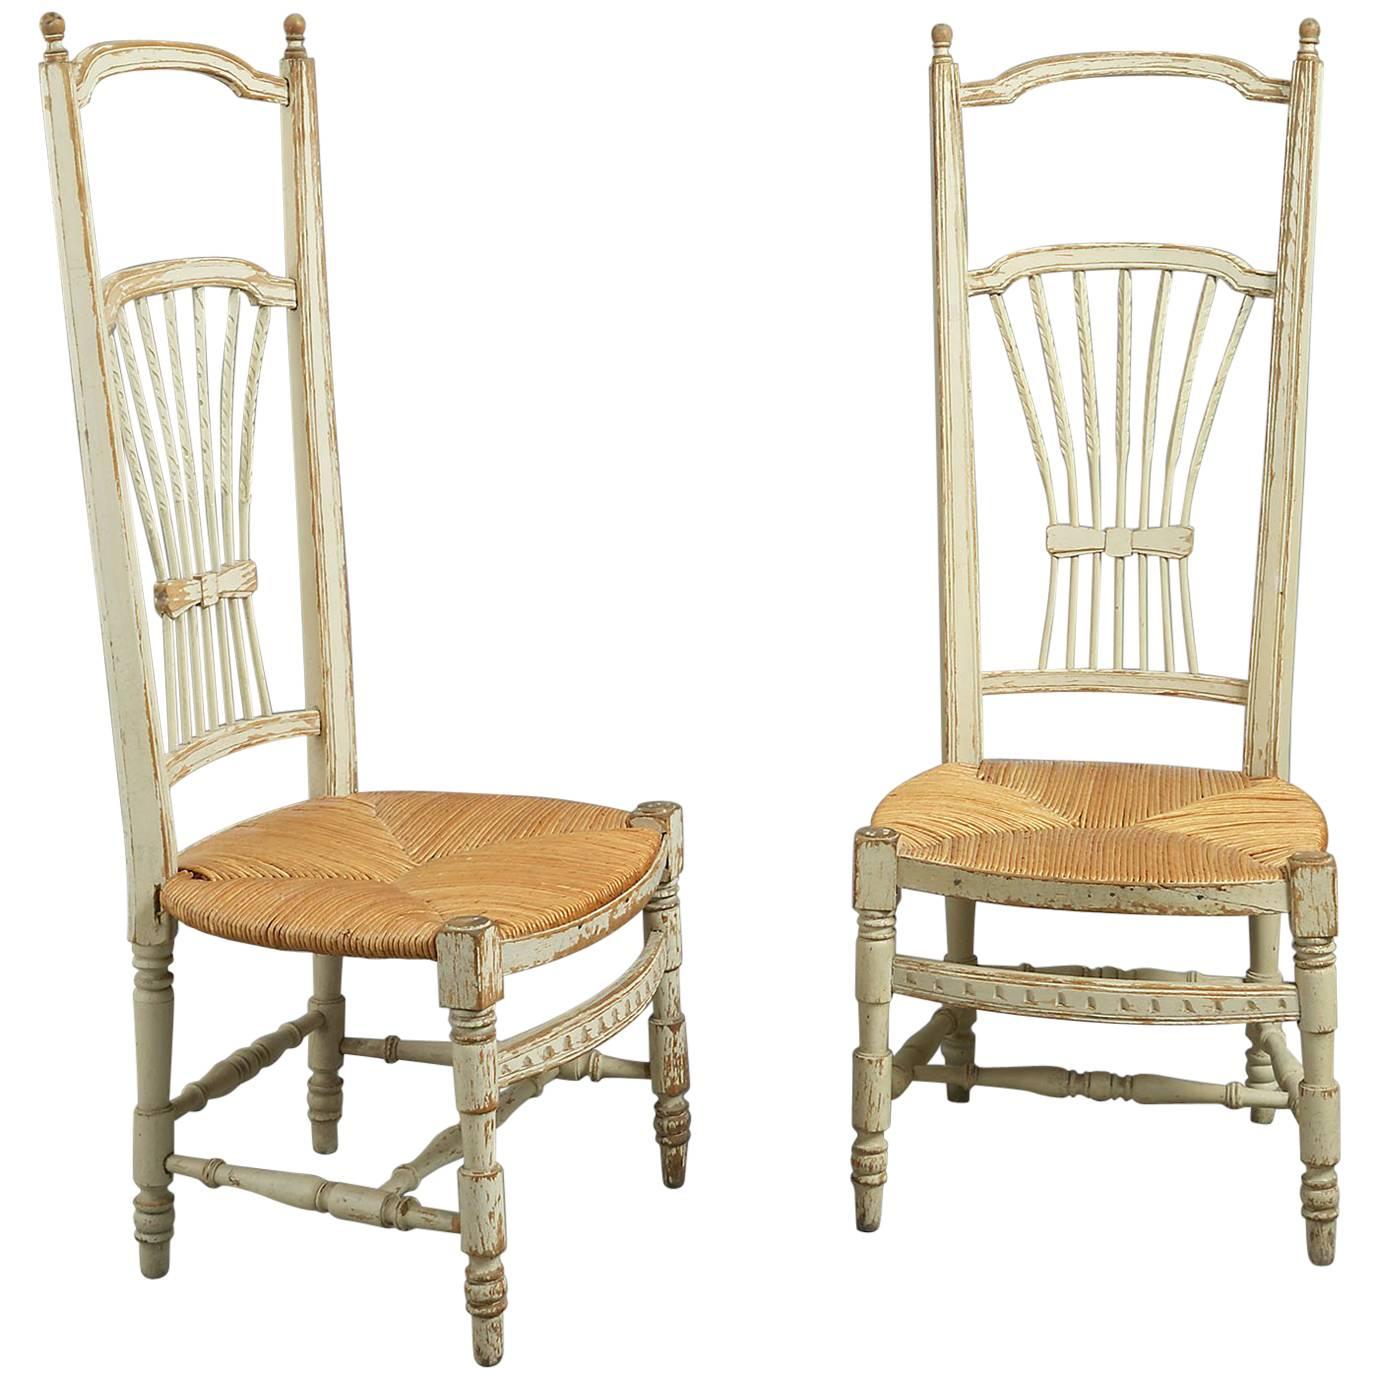 Pair of French Painted Chairs